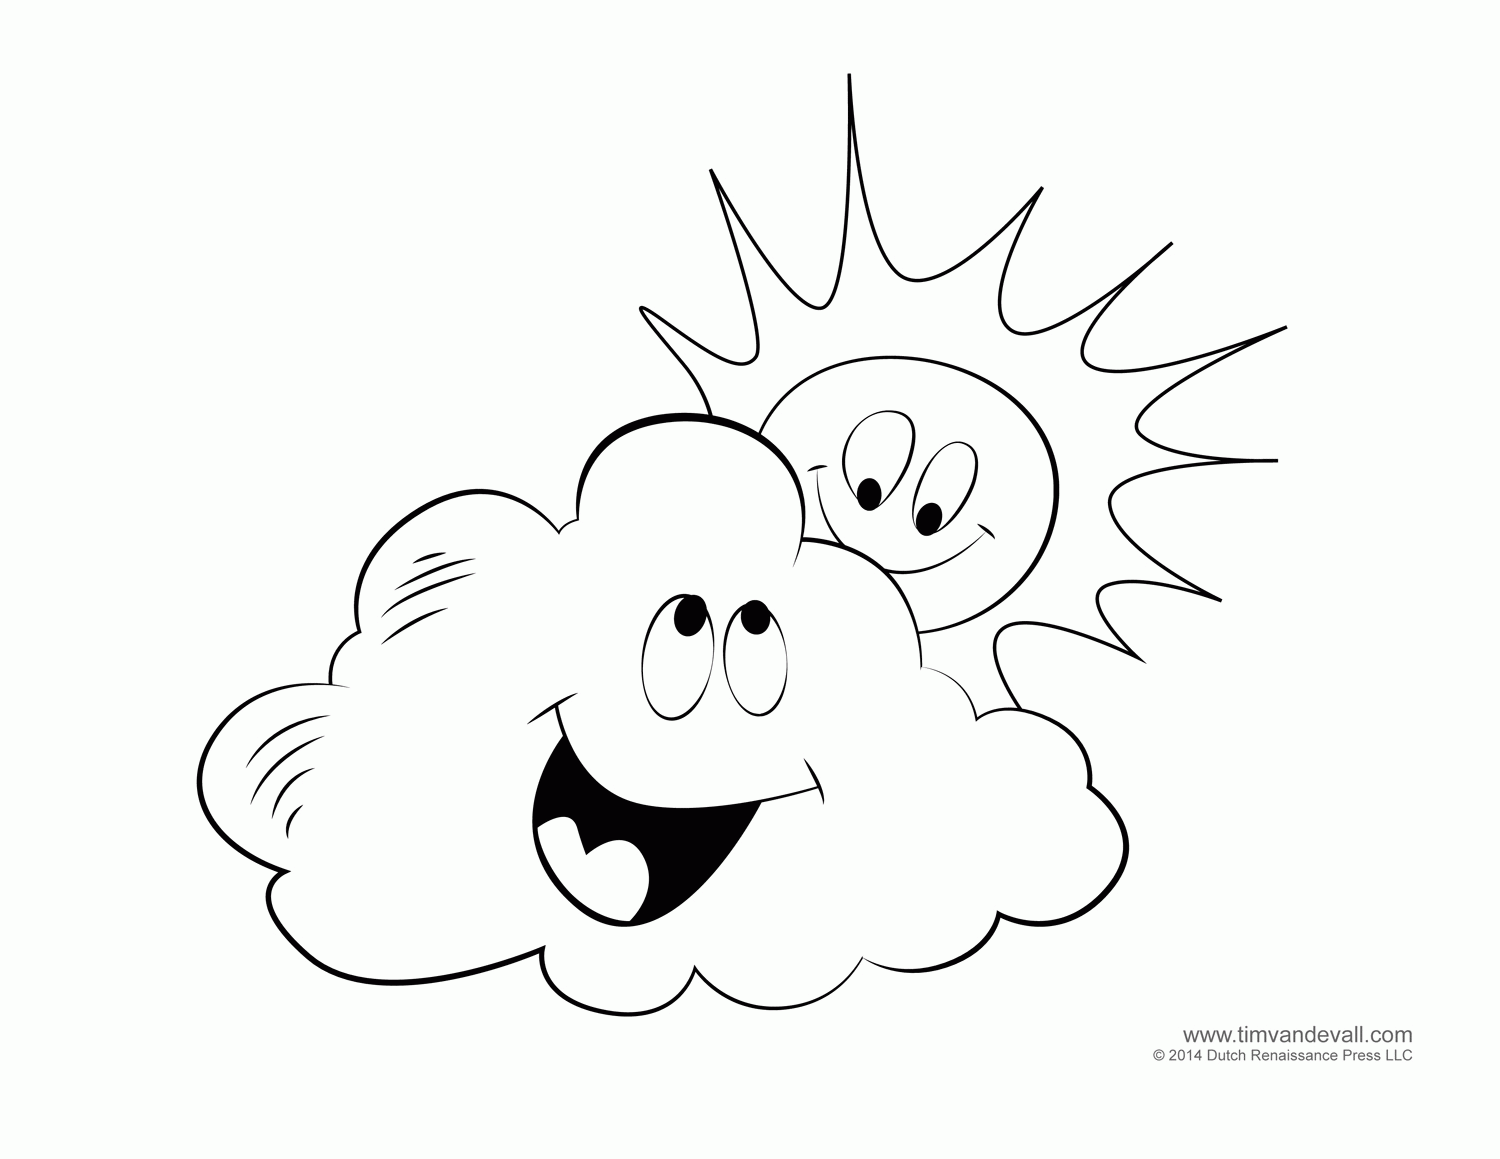 a-weather-coloring-page-with-stars-and-clouds